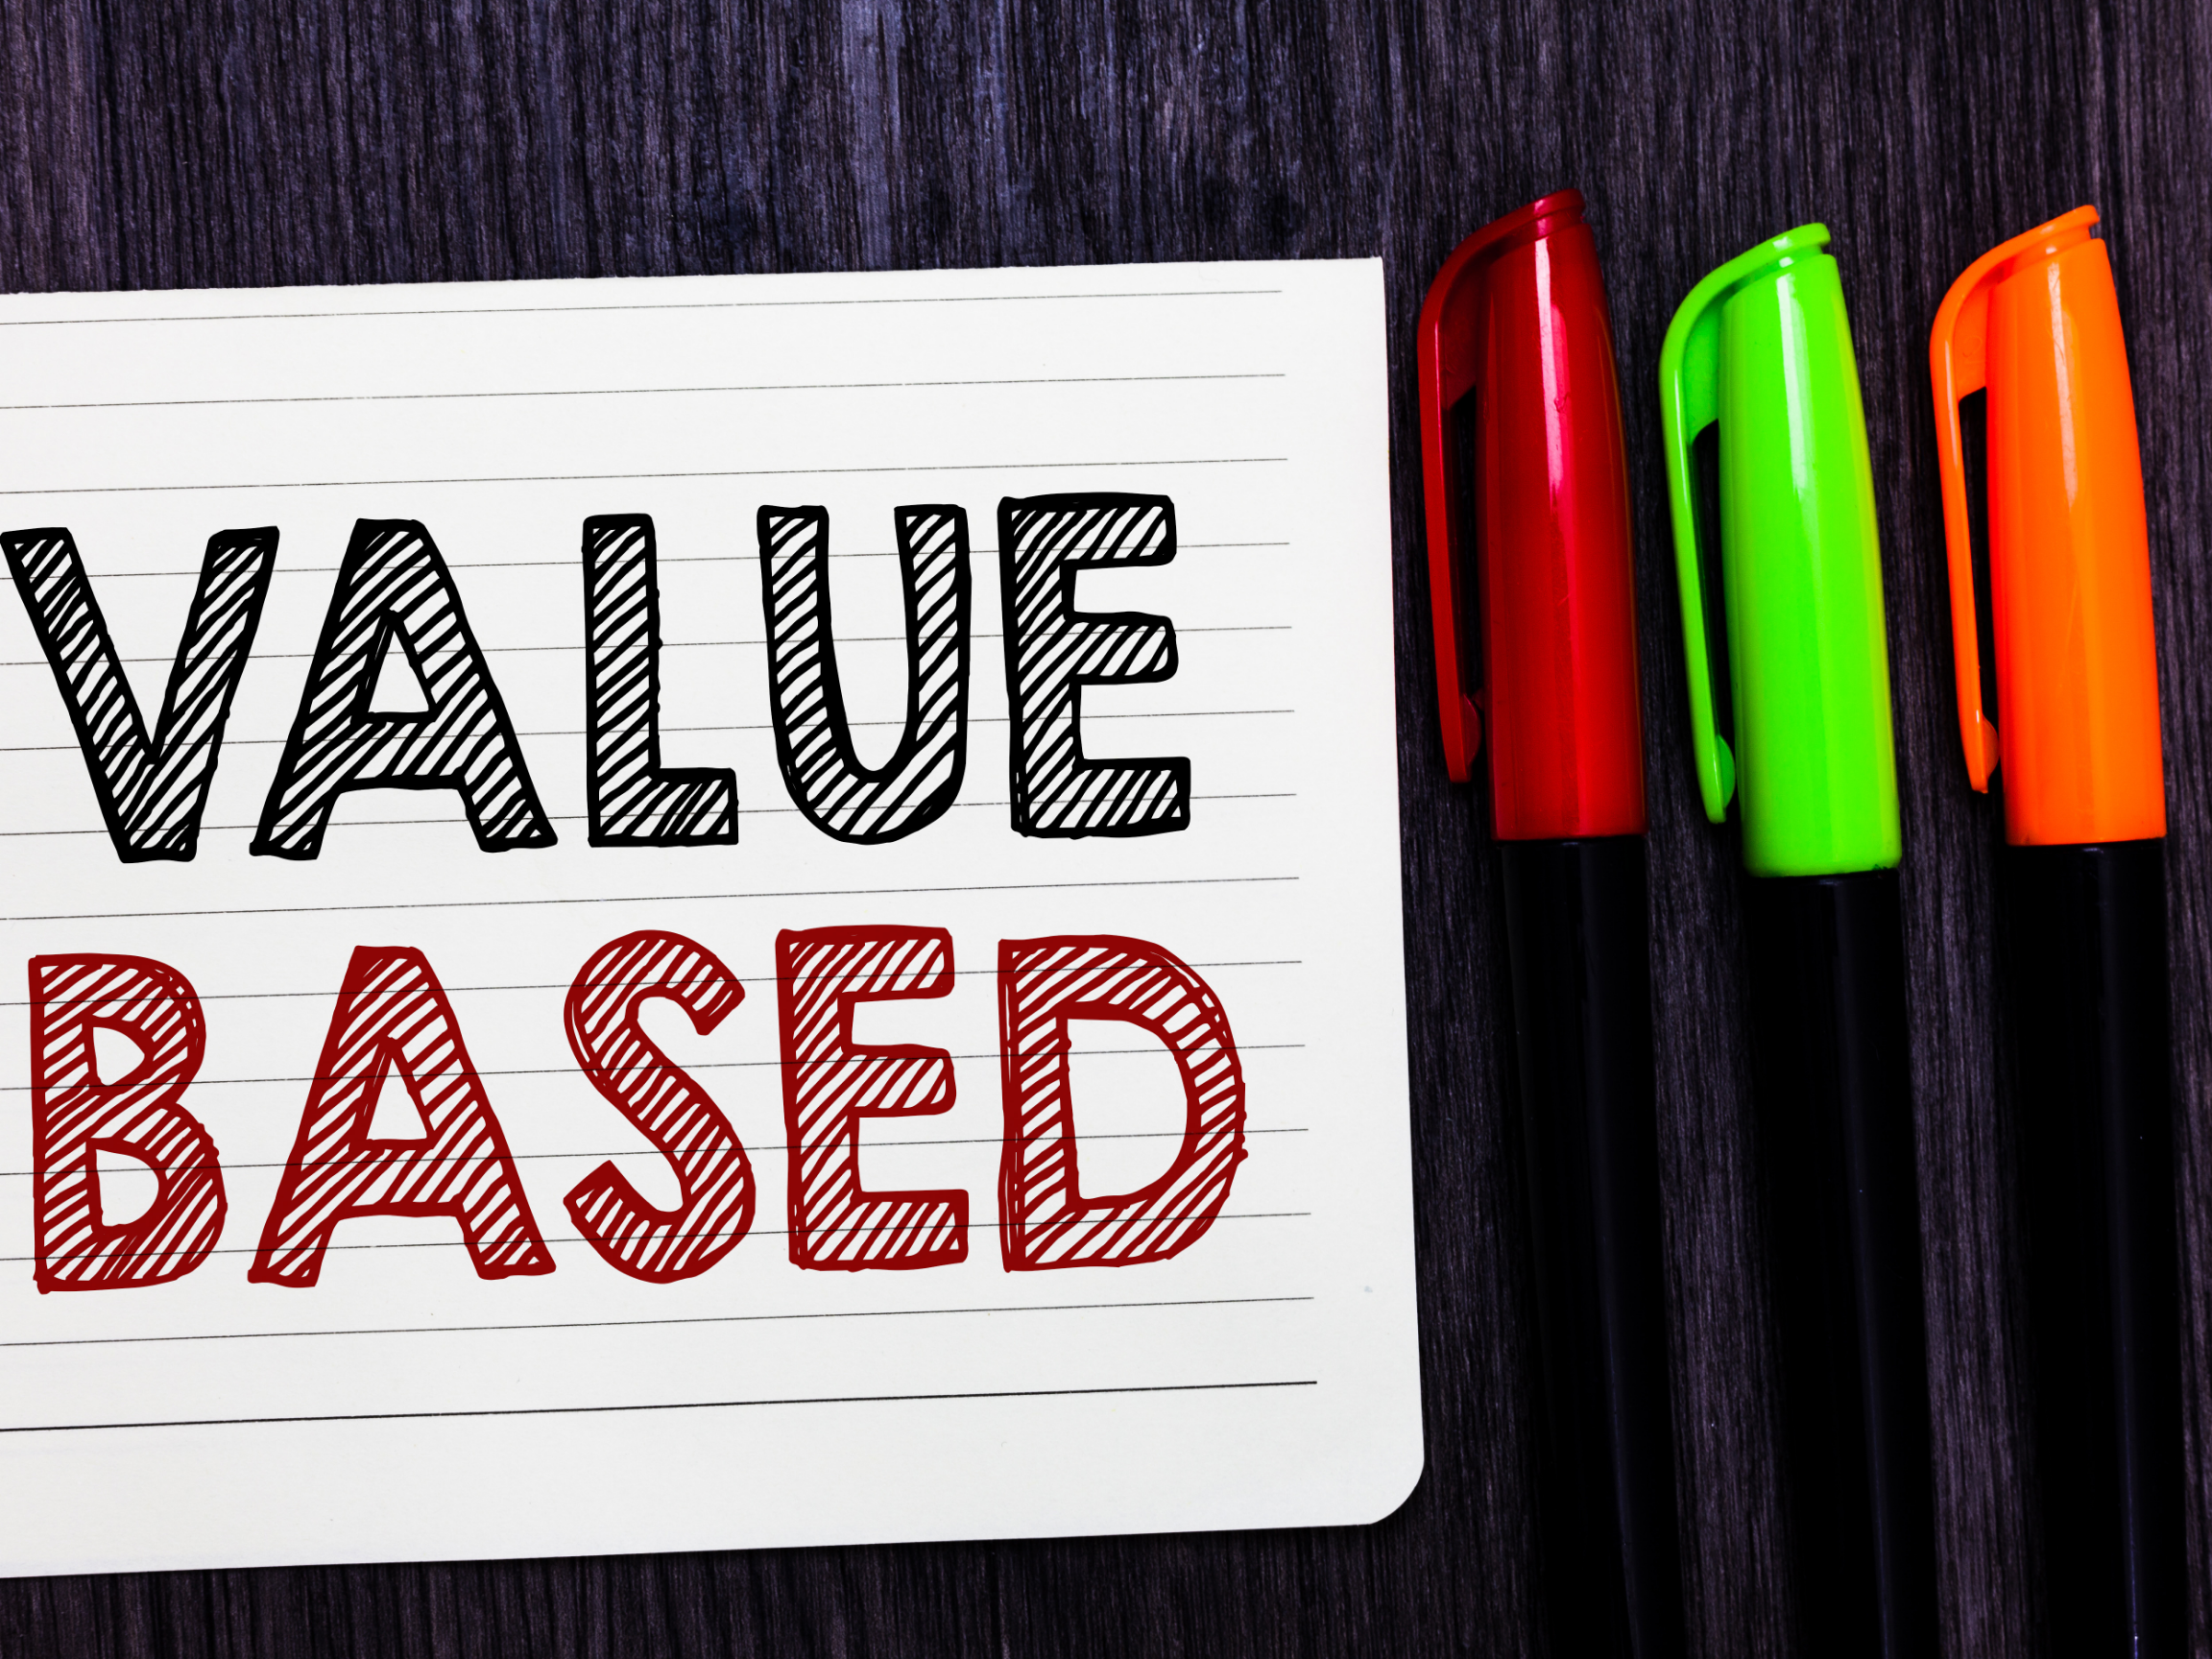 Value Pricing Relies on Effective Segmentation